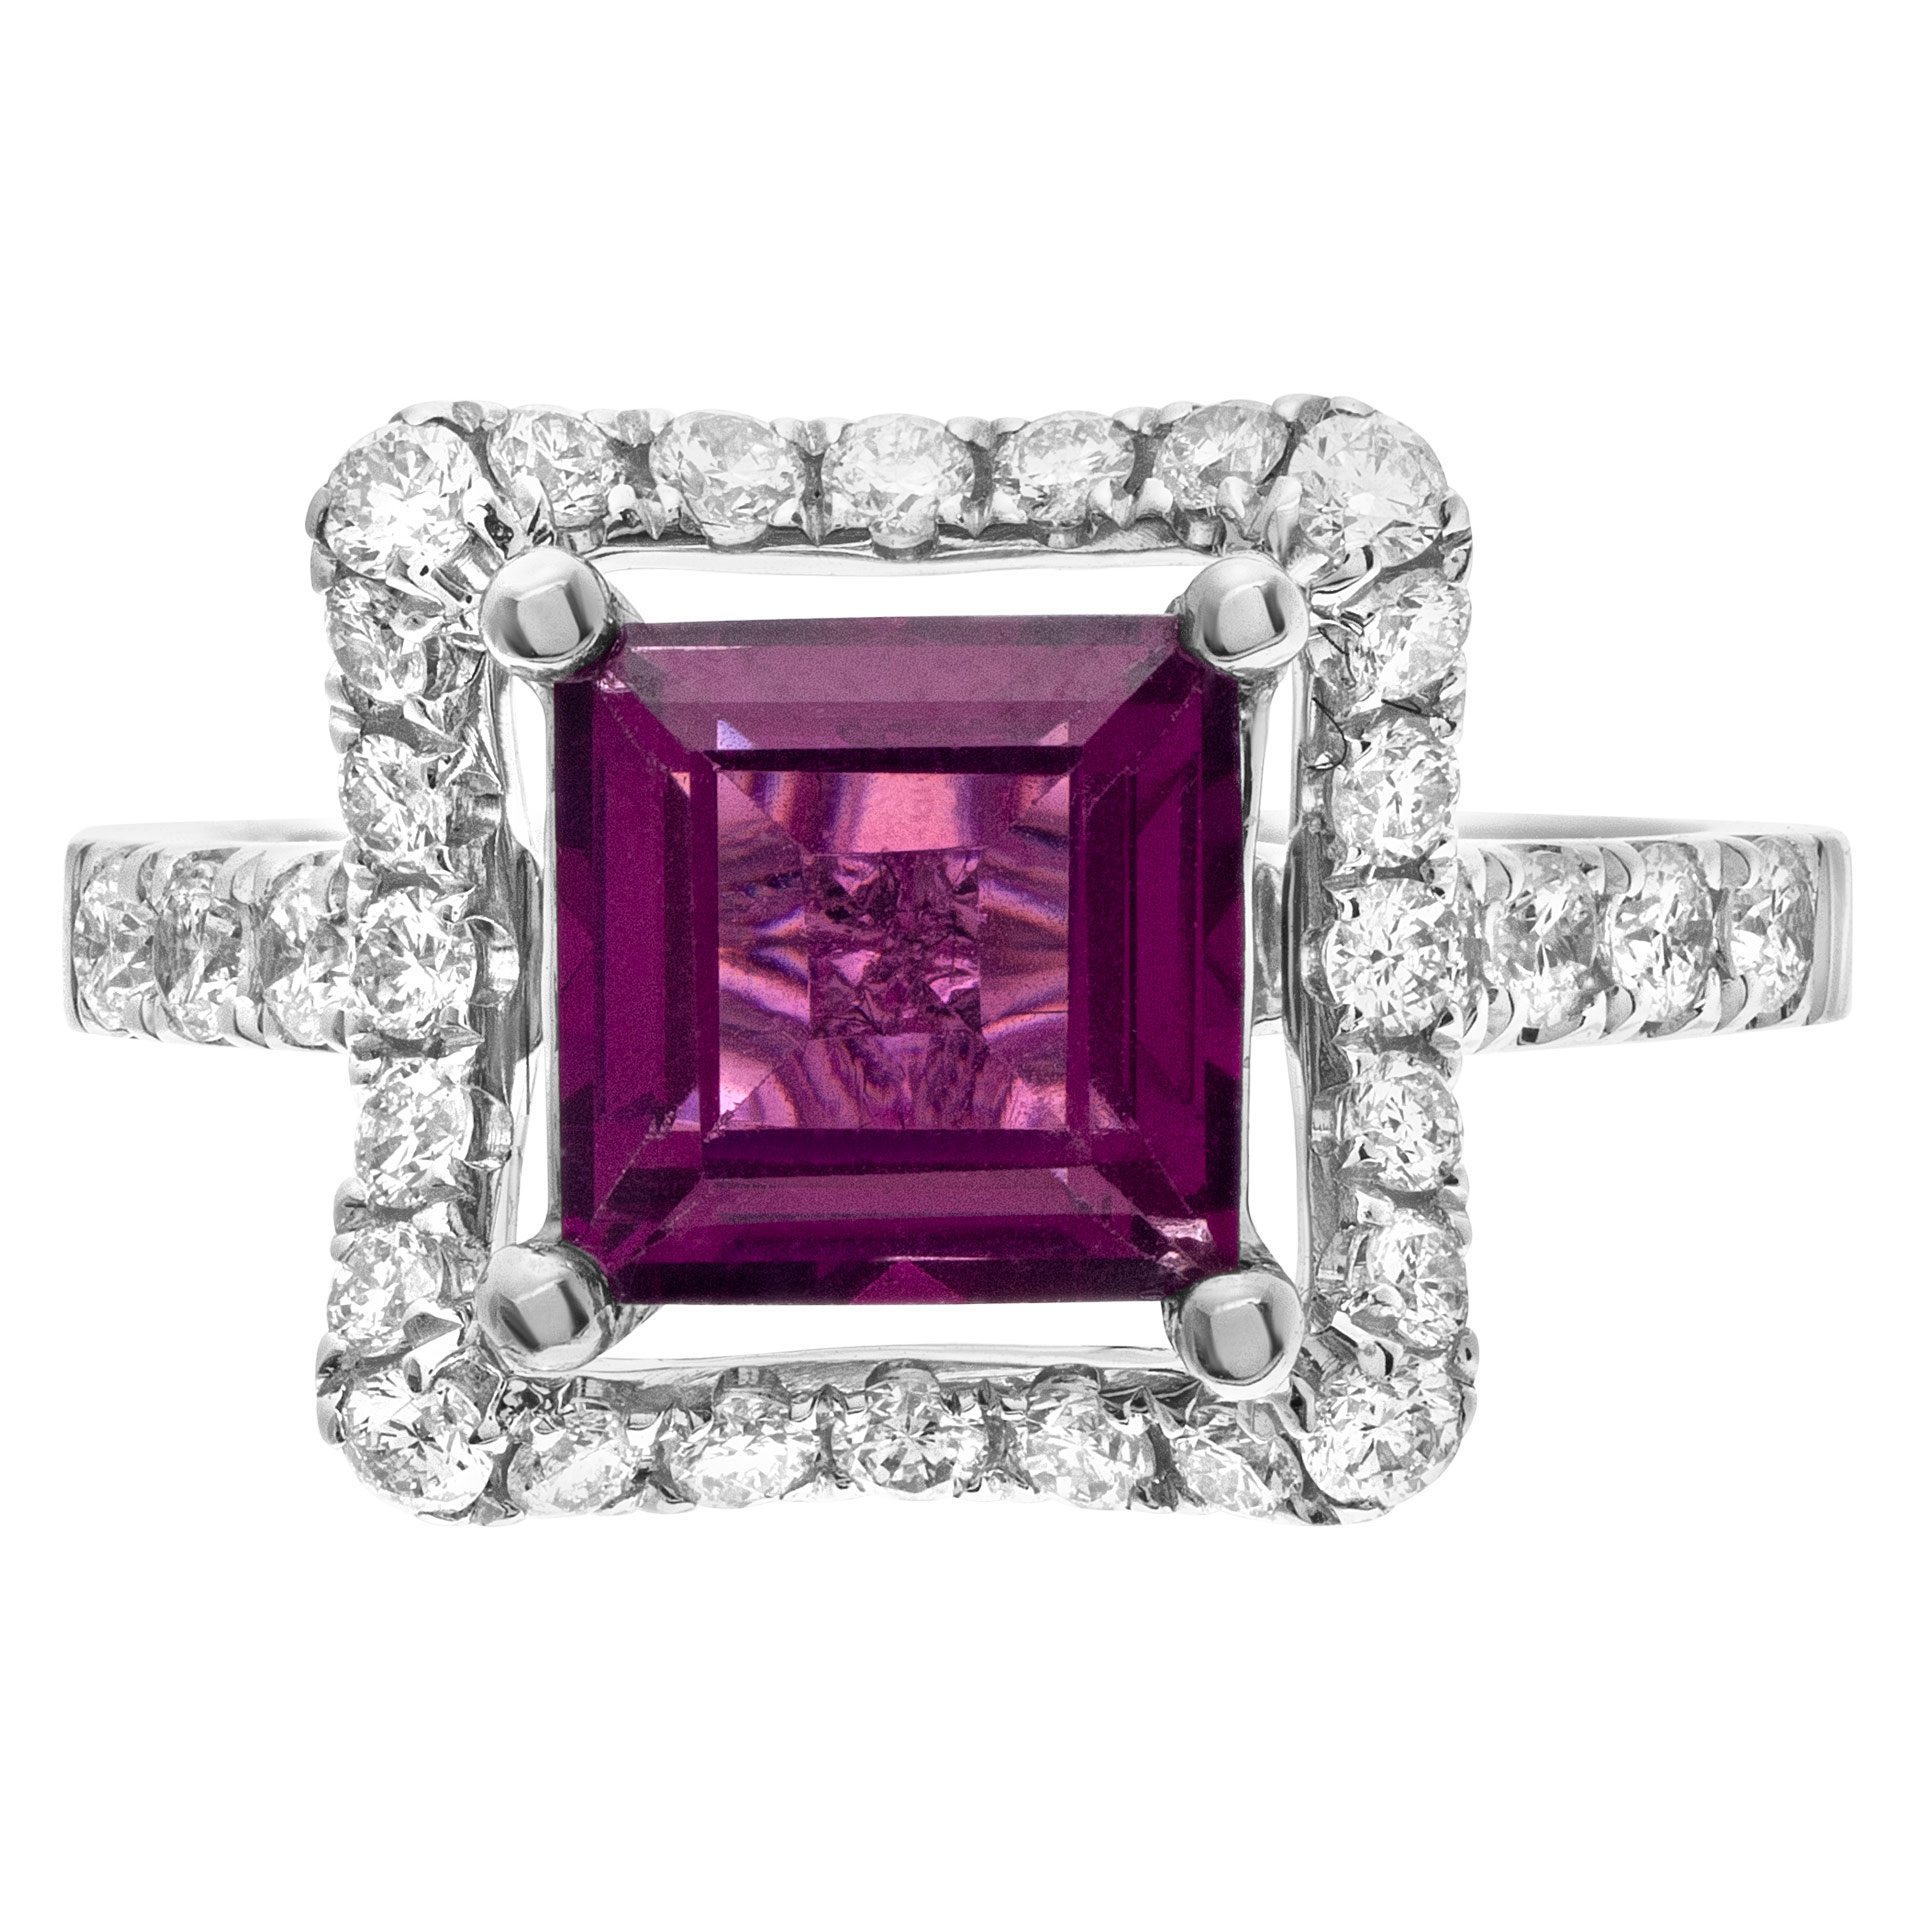 Pink sapphire (2.07cts) diamond ring in 18k white golf